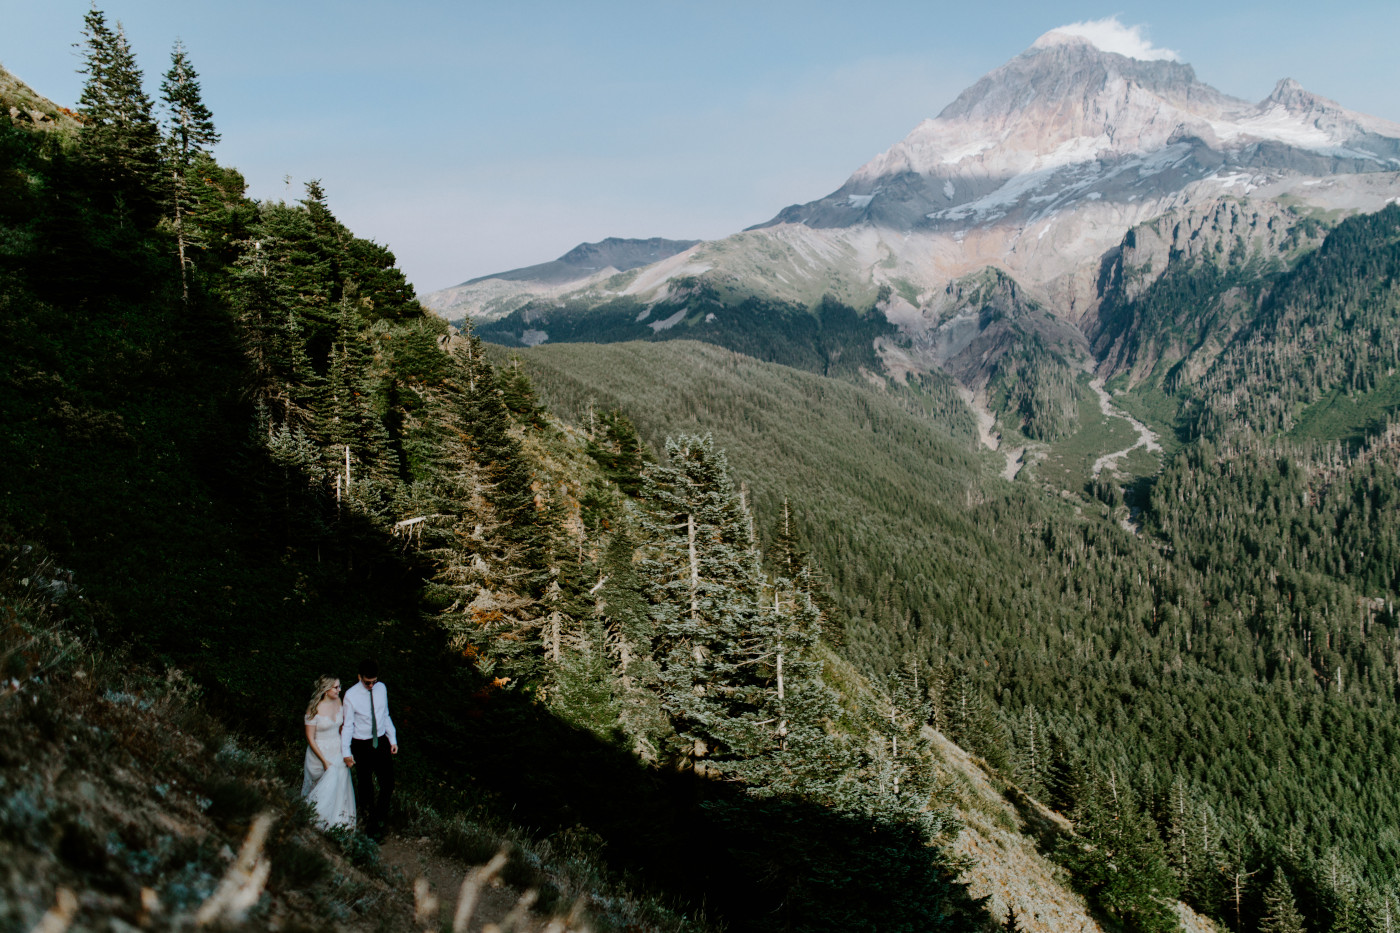 Kylie and Corey walk away from Mount Hood on a trail.